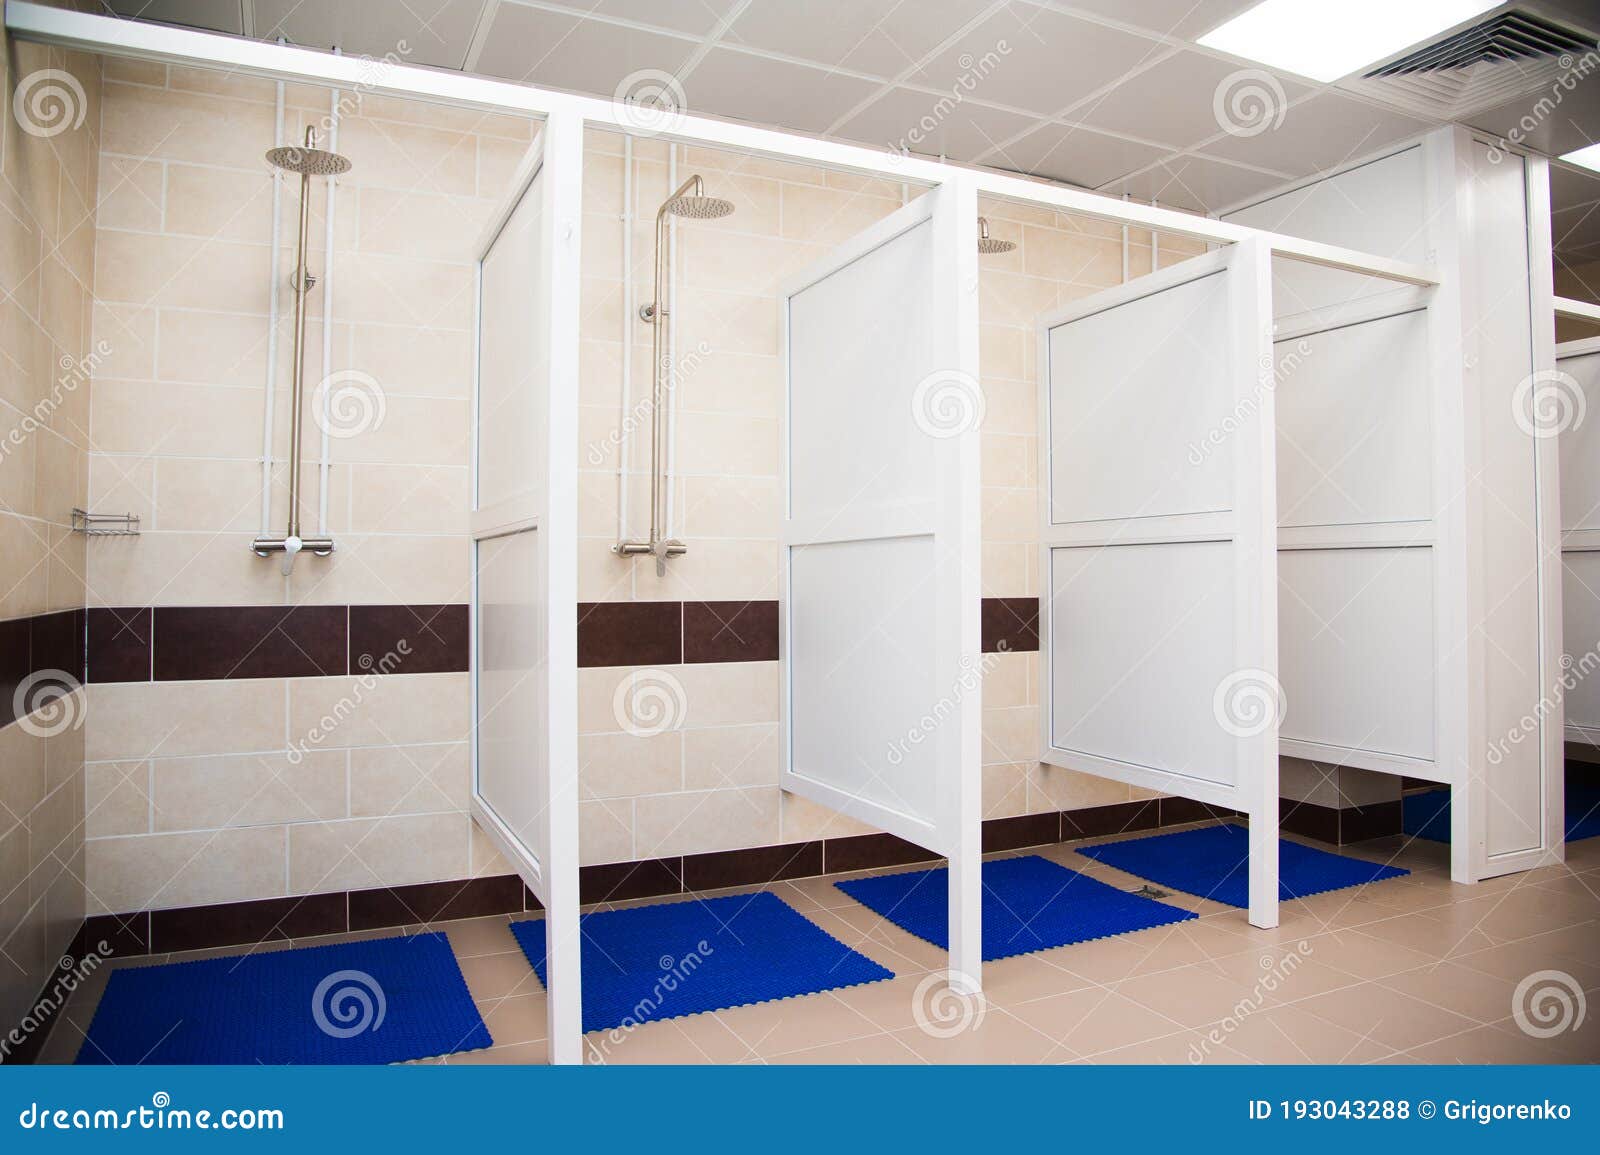 Public Shower Room Stock Photo Image Of Tile Club 193043288